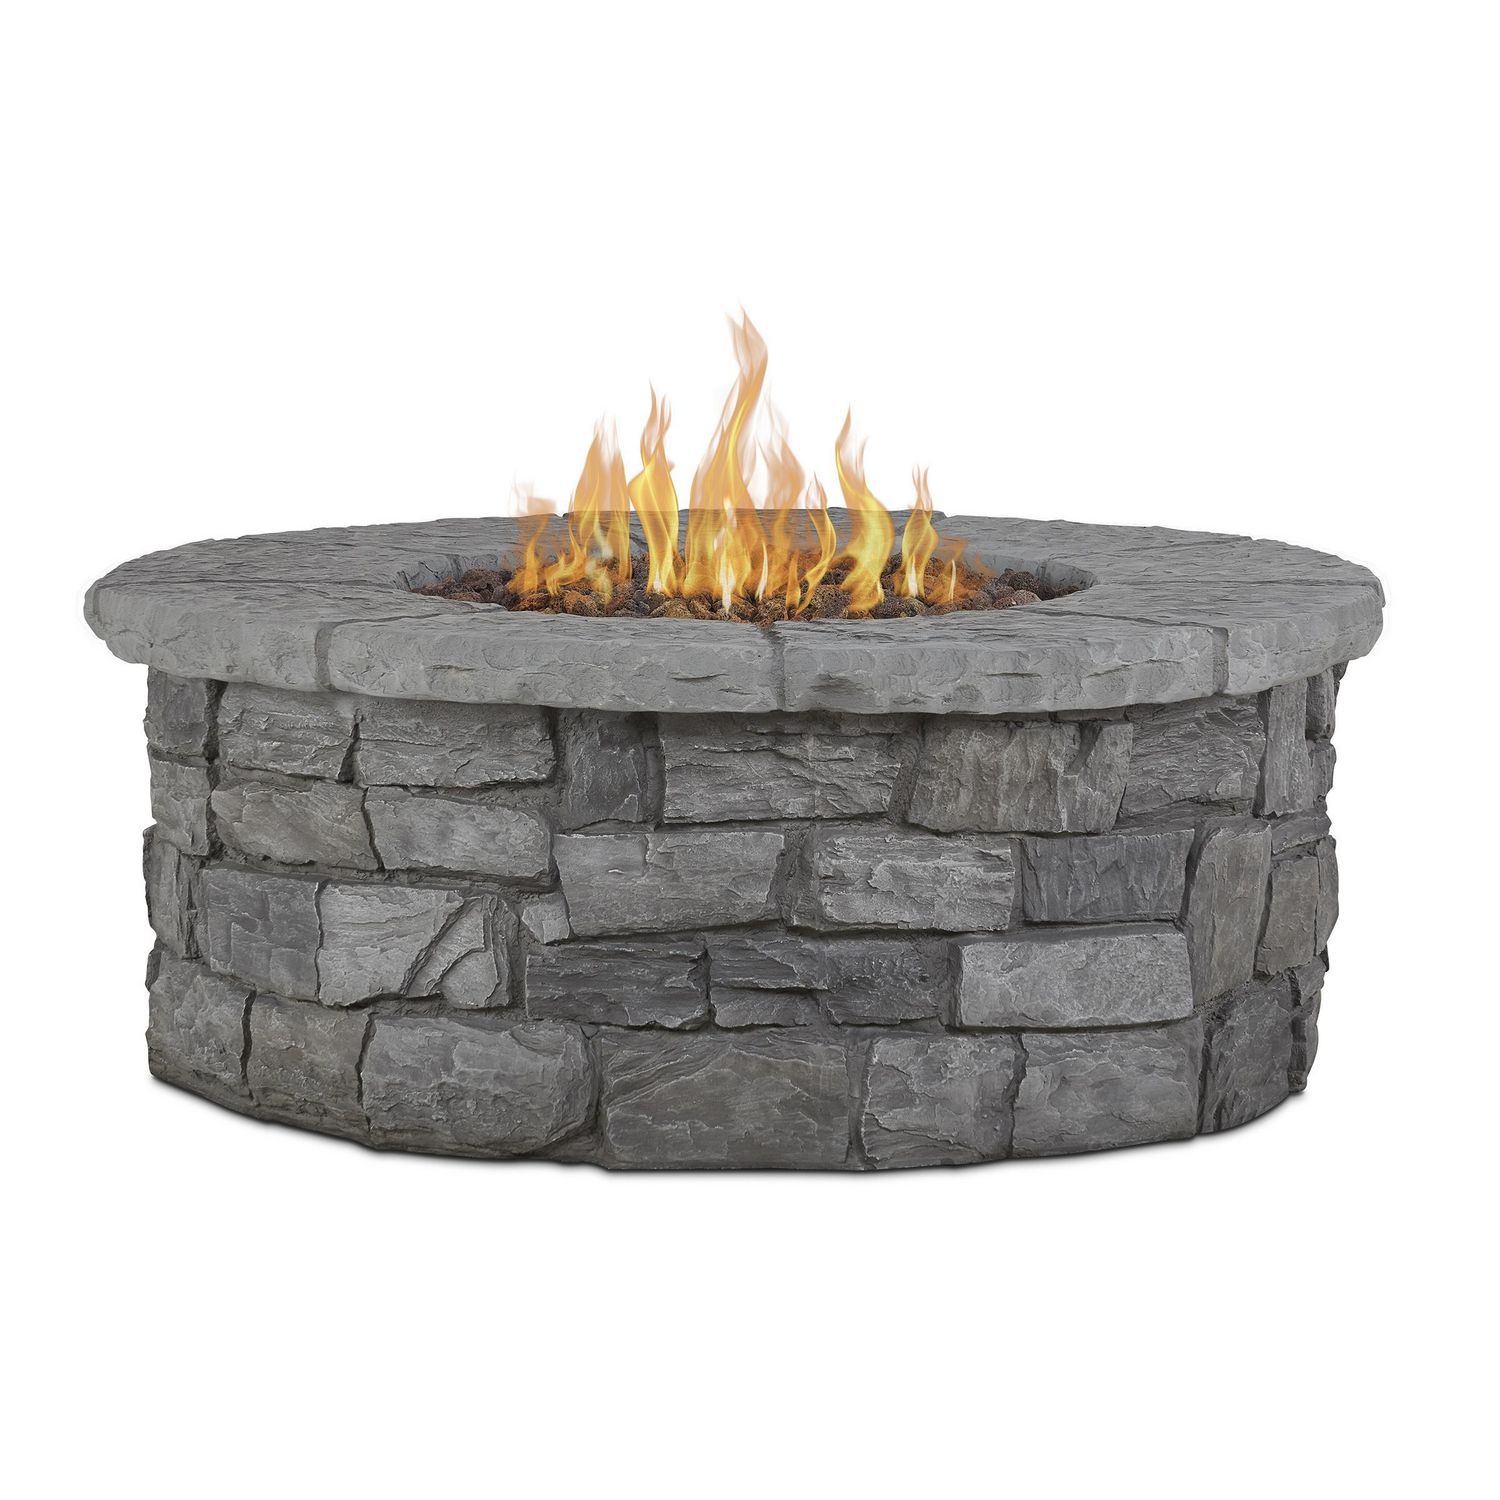 Sedona Round Propane Fire Table In Gray, Fire Pit Gas Conversion